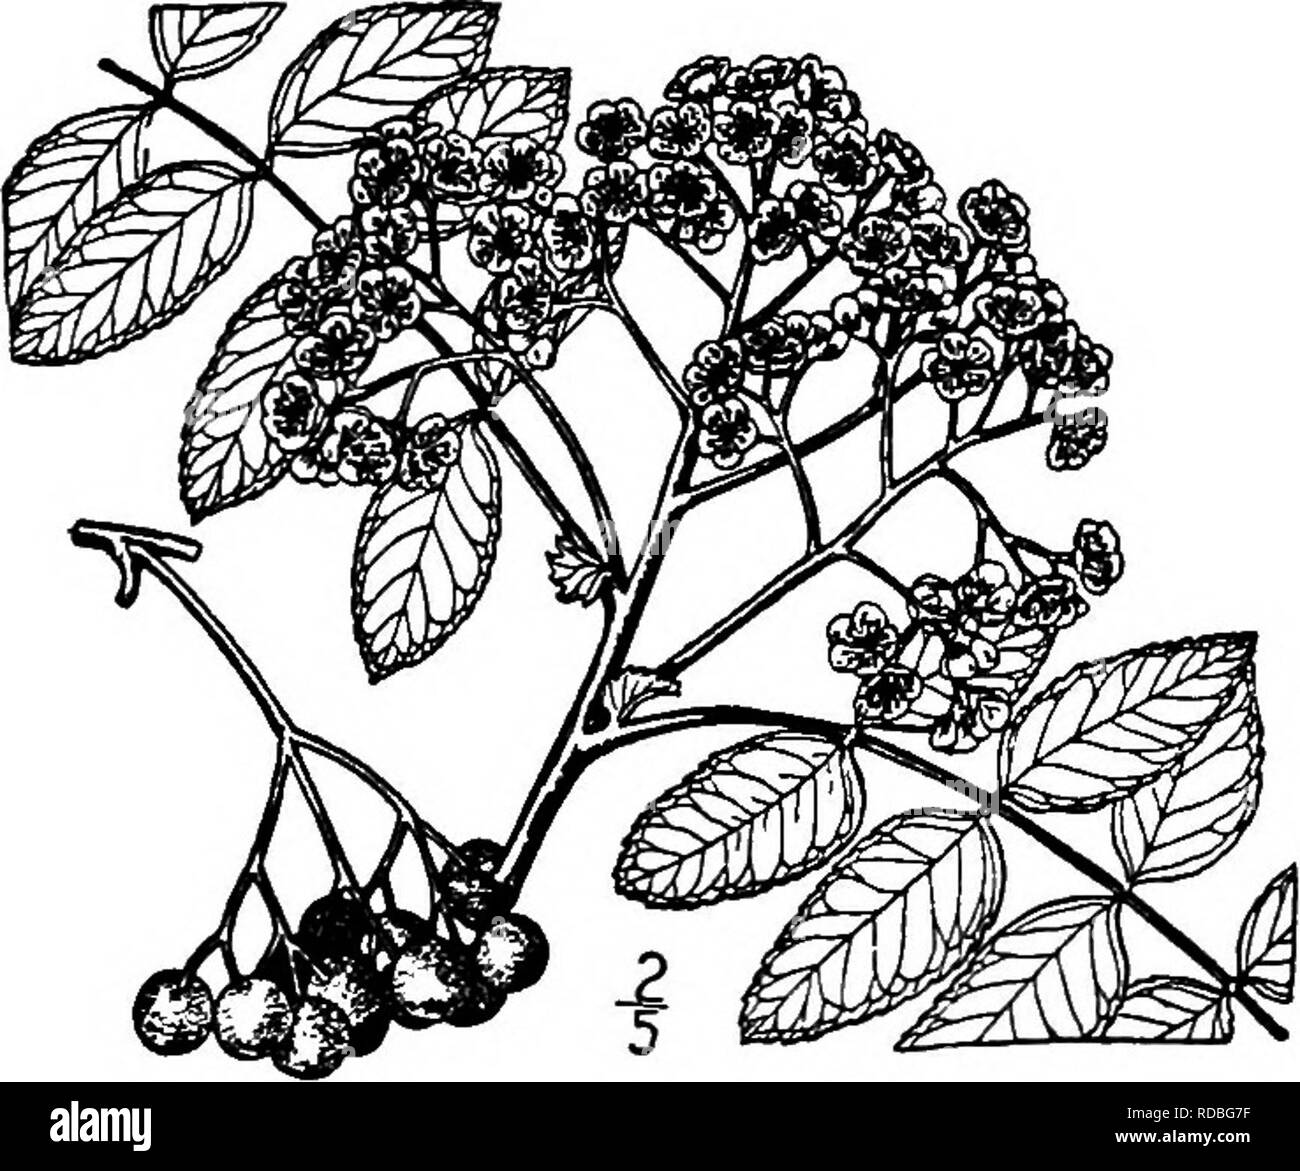 . North American trees : being descriptions and illustrations of the trees growing independently of cultivation in North America, north of Mexico and the West Indies . Trees. 428 The Mountain Ashes fruit ripens in late autumn, is globose or slightly pear-shaped, 4 to 8 mm. in di- ameter and bright red, its flesh acidulous; seeds about 3 mm. long, angular, rounded at the top, sharp-pointed at the base. The wood is soft, close-grained, weak, and brown; its specific gravity is about 0.55. At the North the tree is occasionally planted for ornament and shade, and deserves more extended use in the c Stock Photo